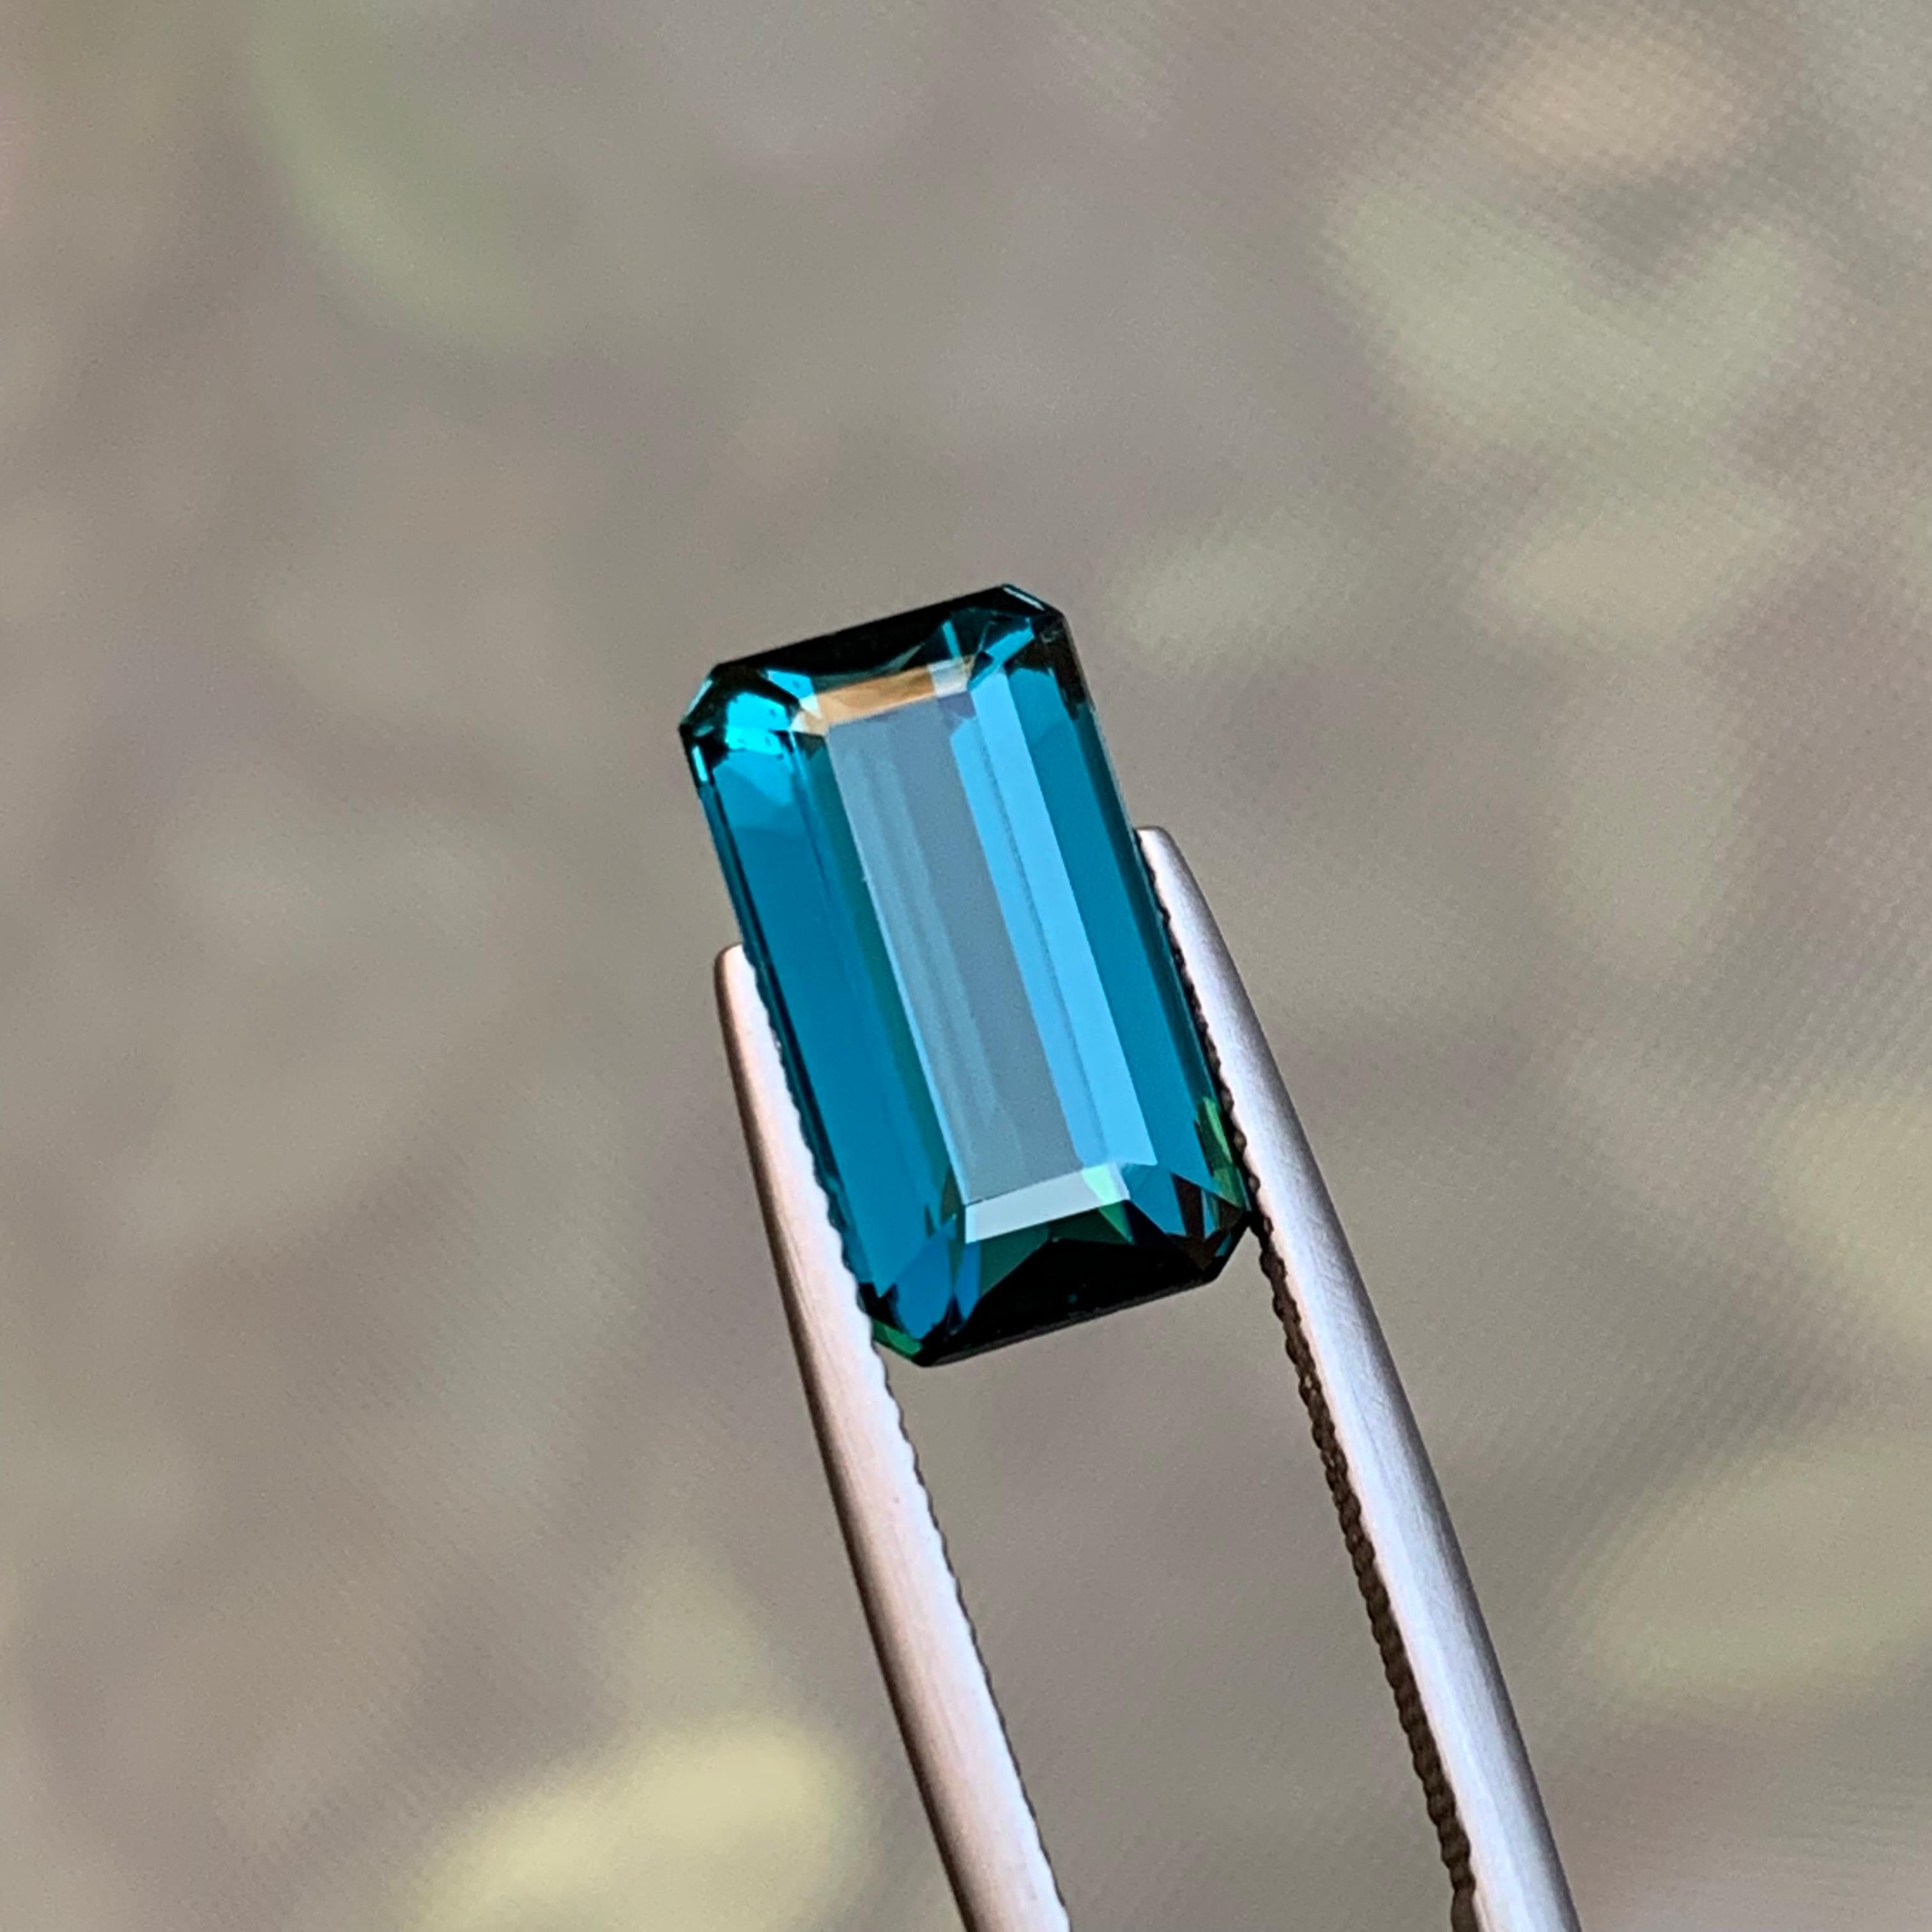 Rare Indicolite Blue Natural Tourmaline Gemstone, 5.20 Ct Emerald Cut for a Ring For Sale 1